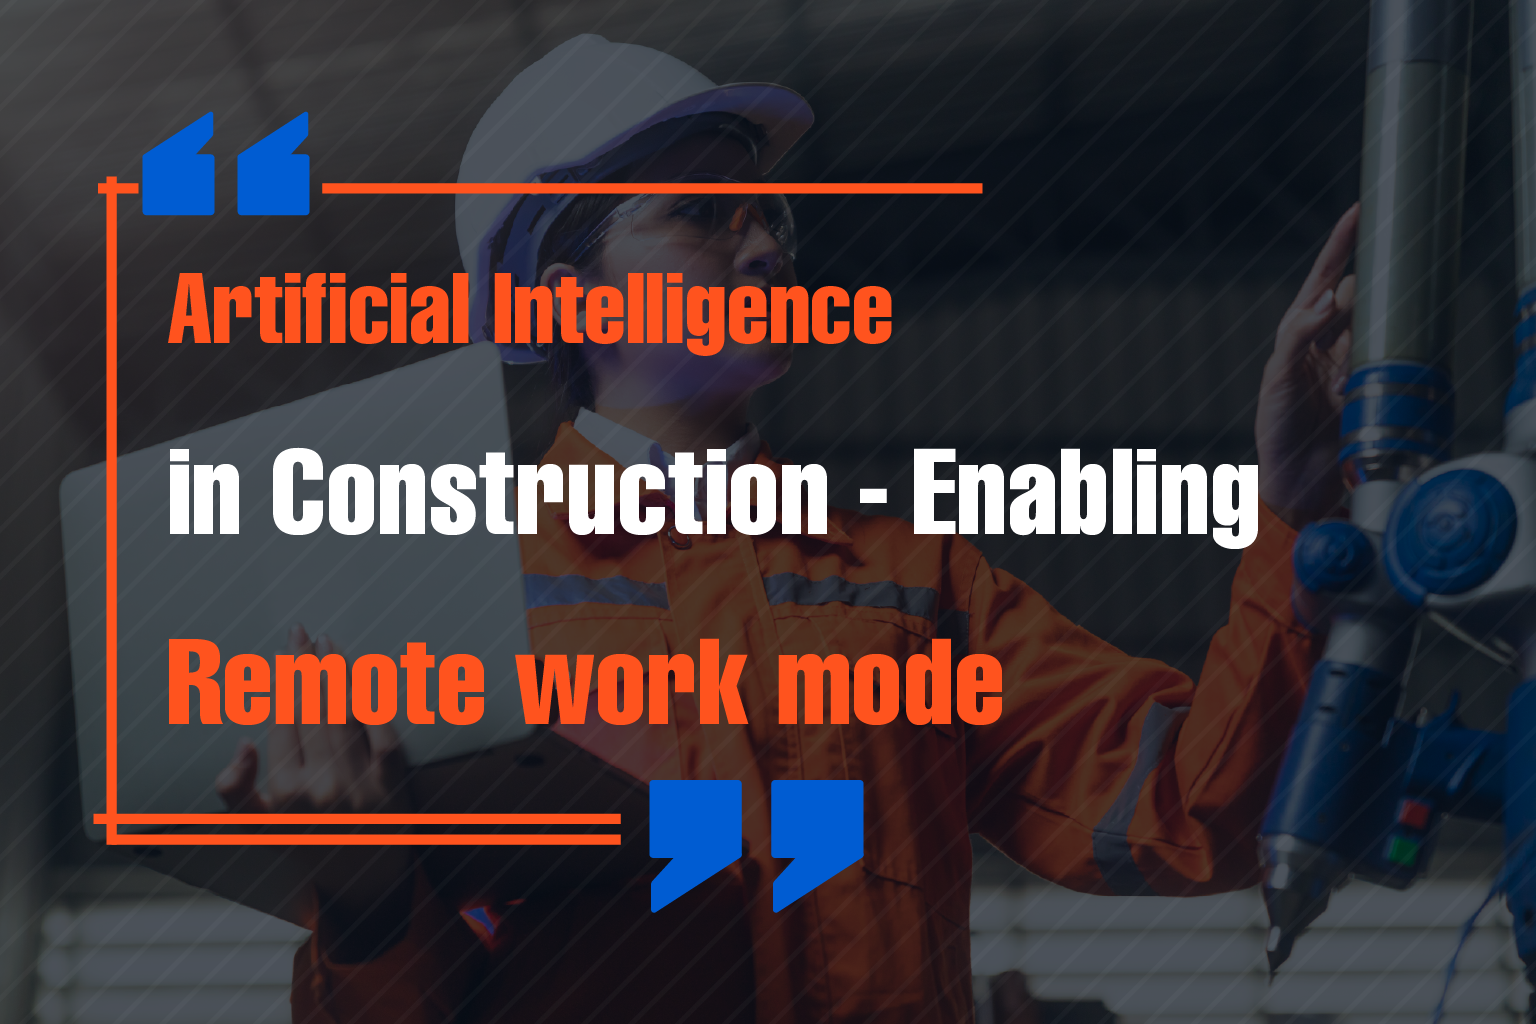 Artificial Intelligence in Construction - Enabling Remote work mode